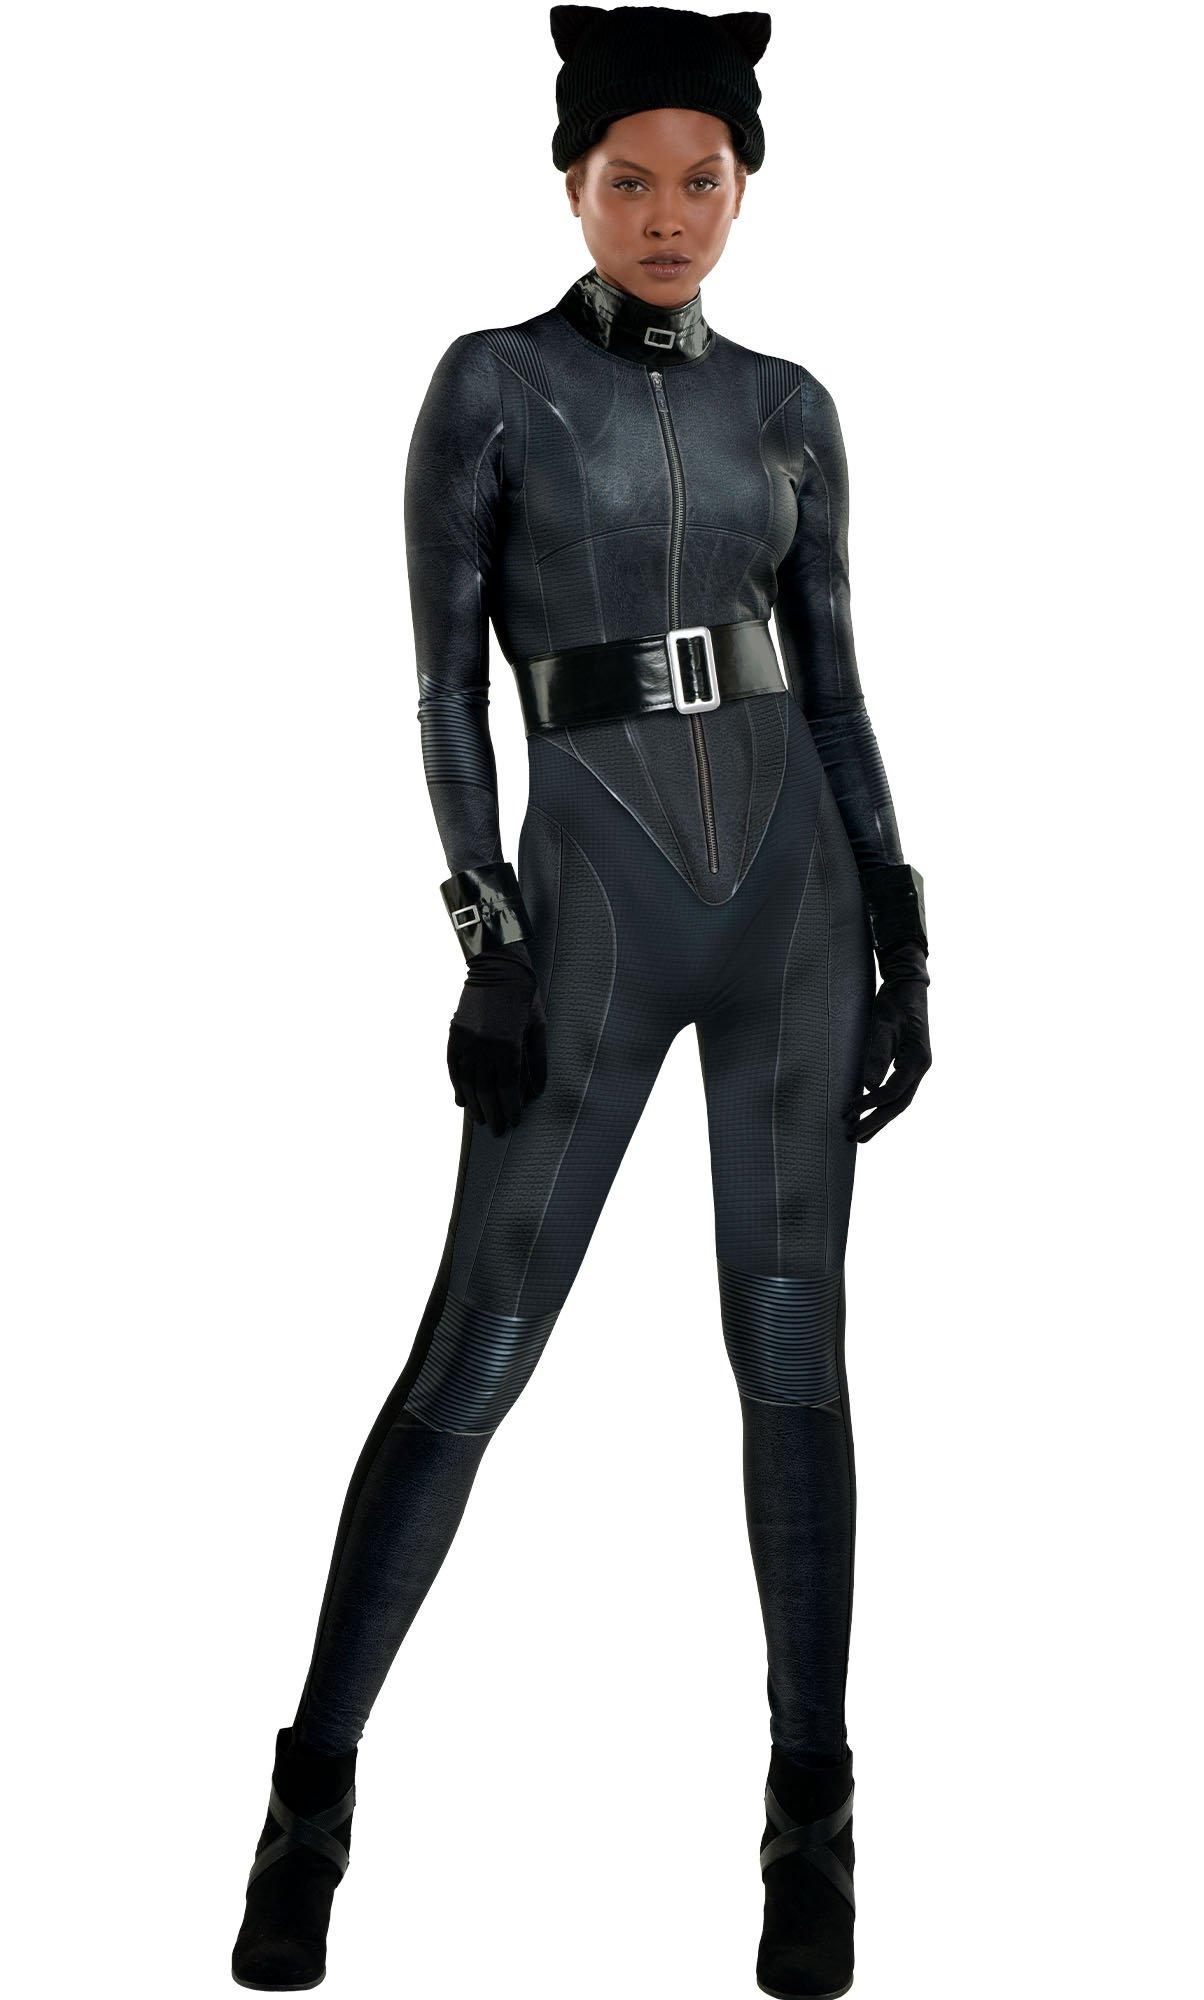 black latex suit costume, black latex suit costume Suppliers and  Manufacturers at